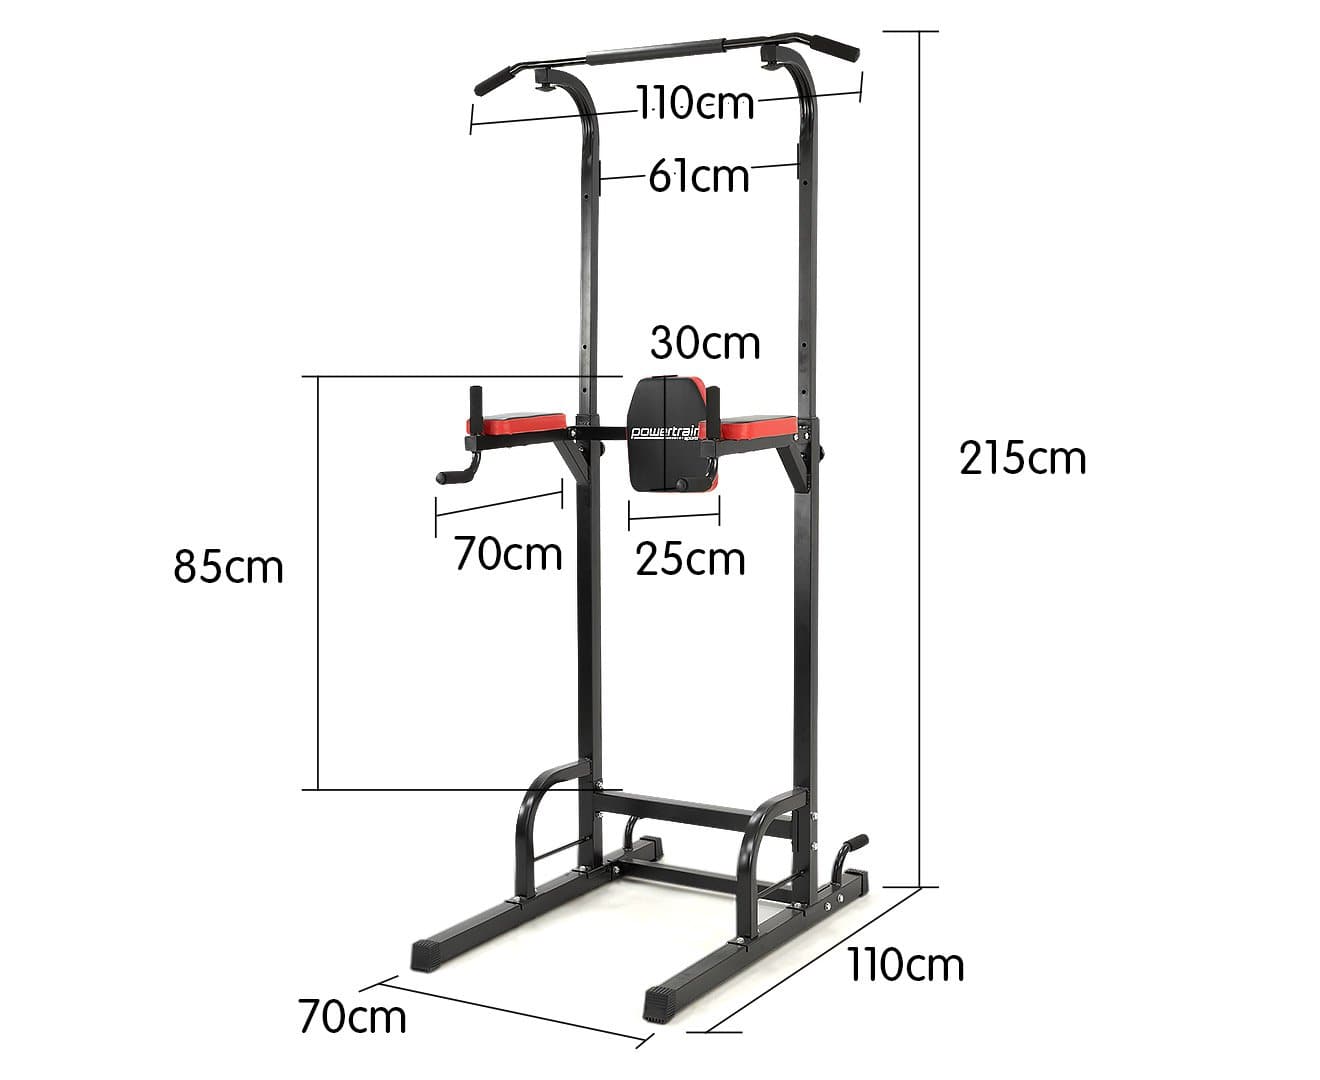 Fatherday-sports and fitness Powertrain Multi Station Home Gym Chin-up Pull-up Tower